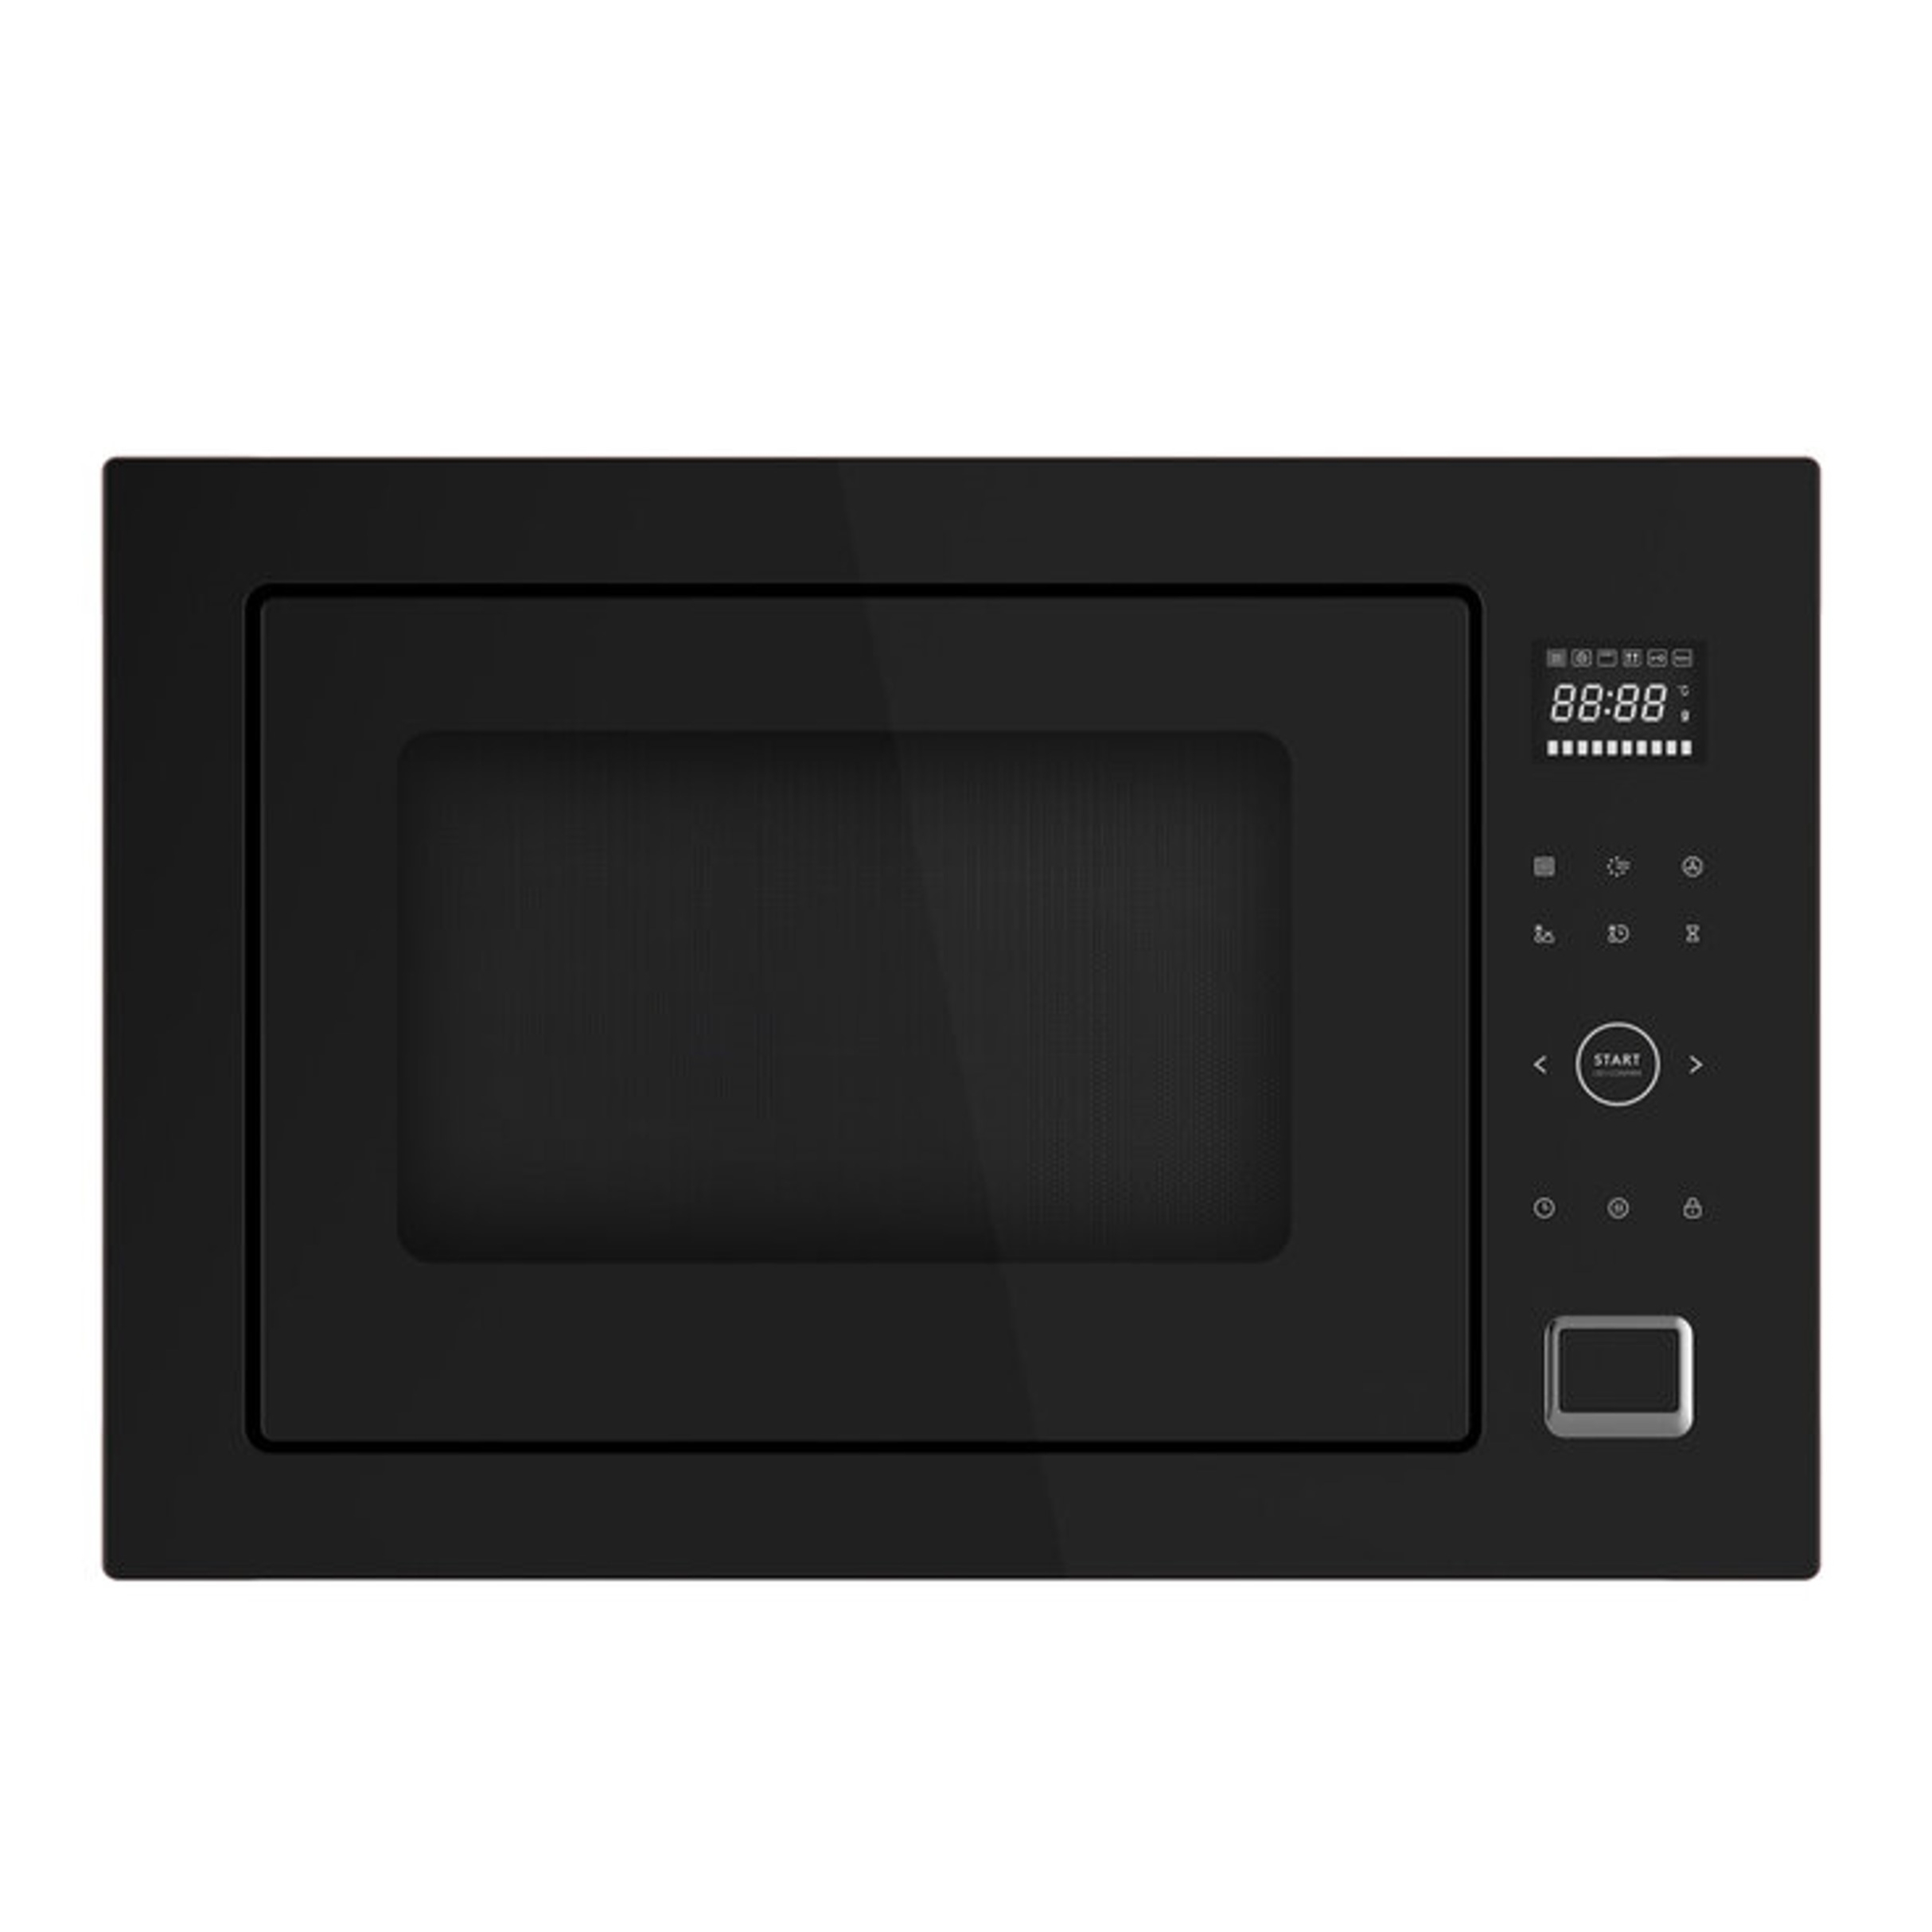 InAlto 34L Built-in Convection Microwave IMC34BF